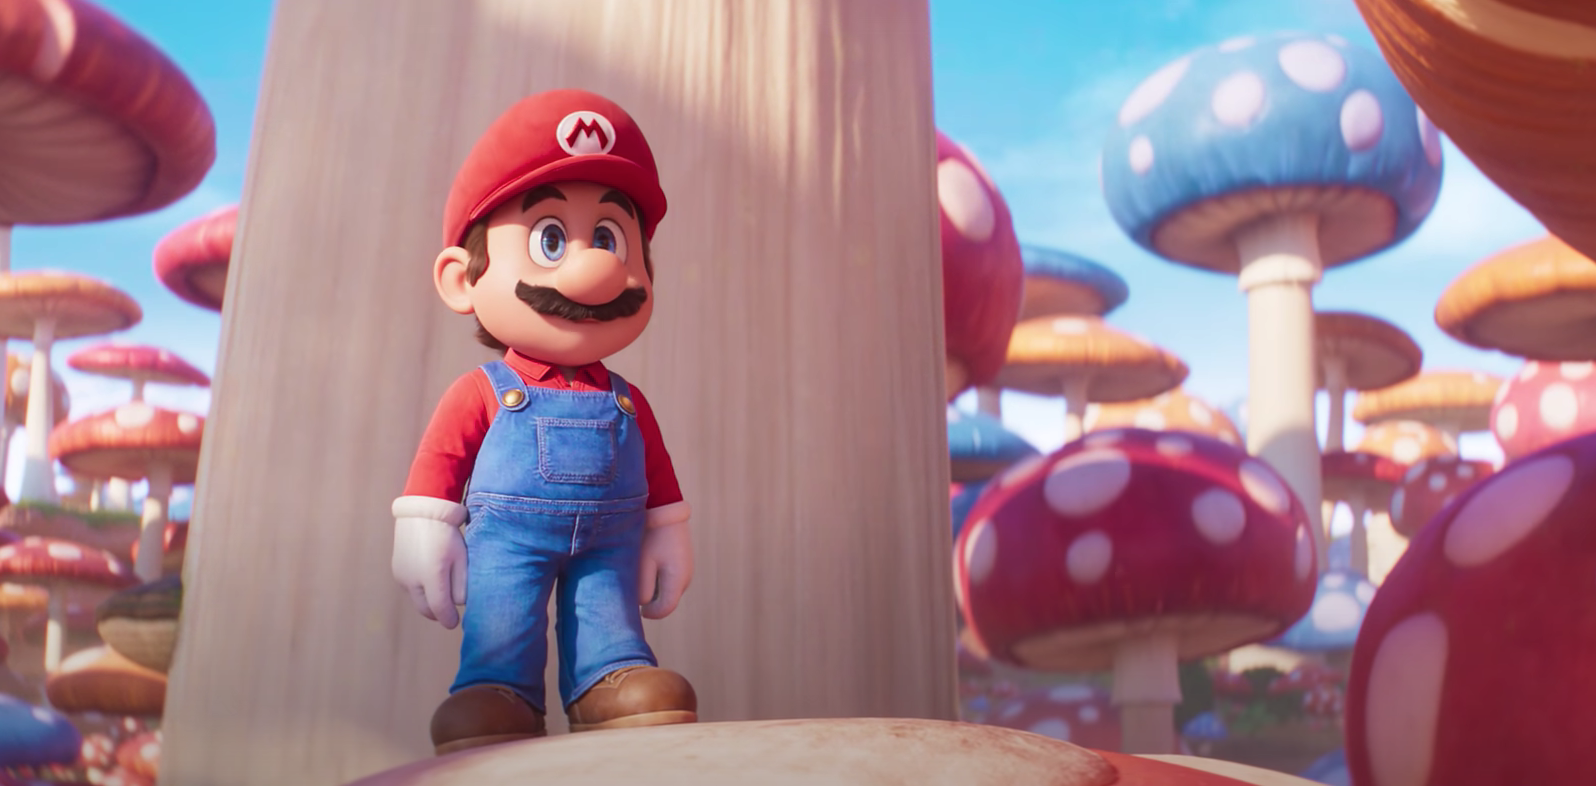 Here's the first trailer for the 'Super Mario Bros' movie